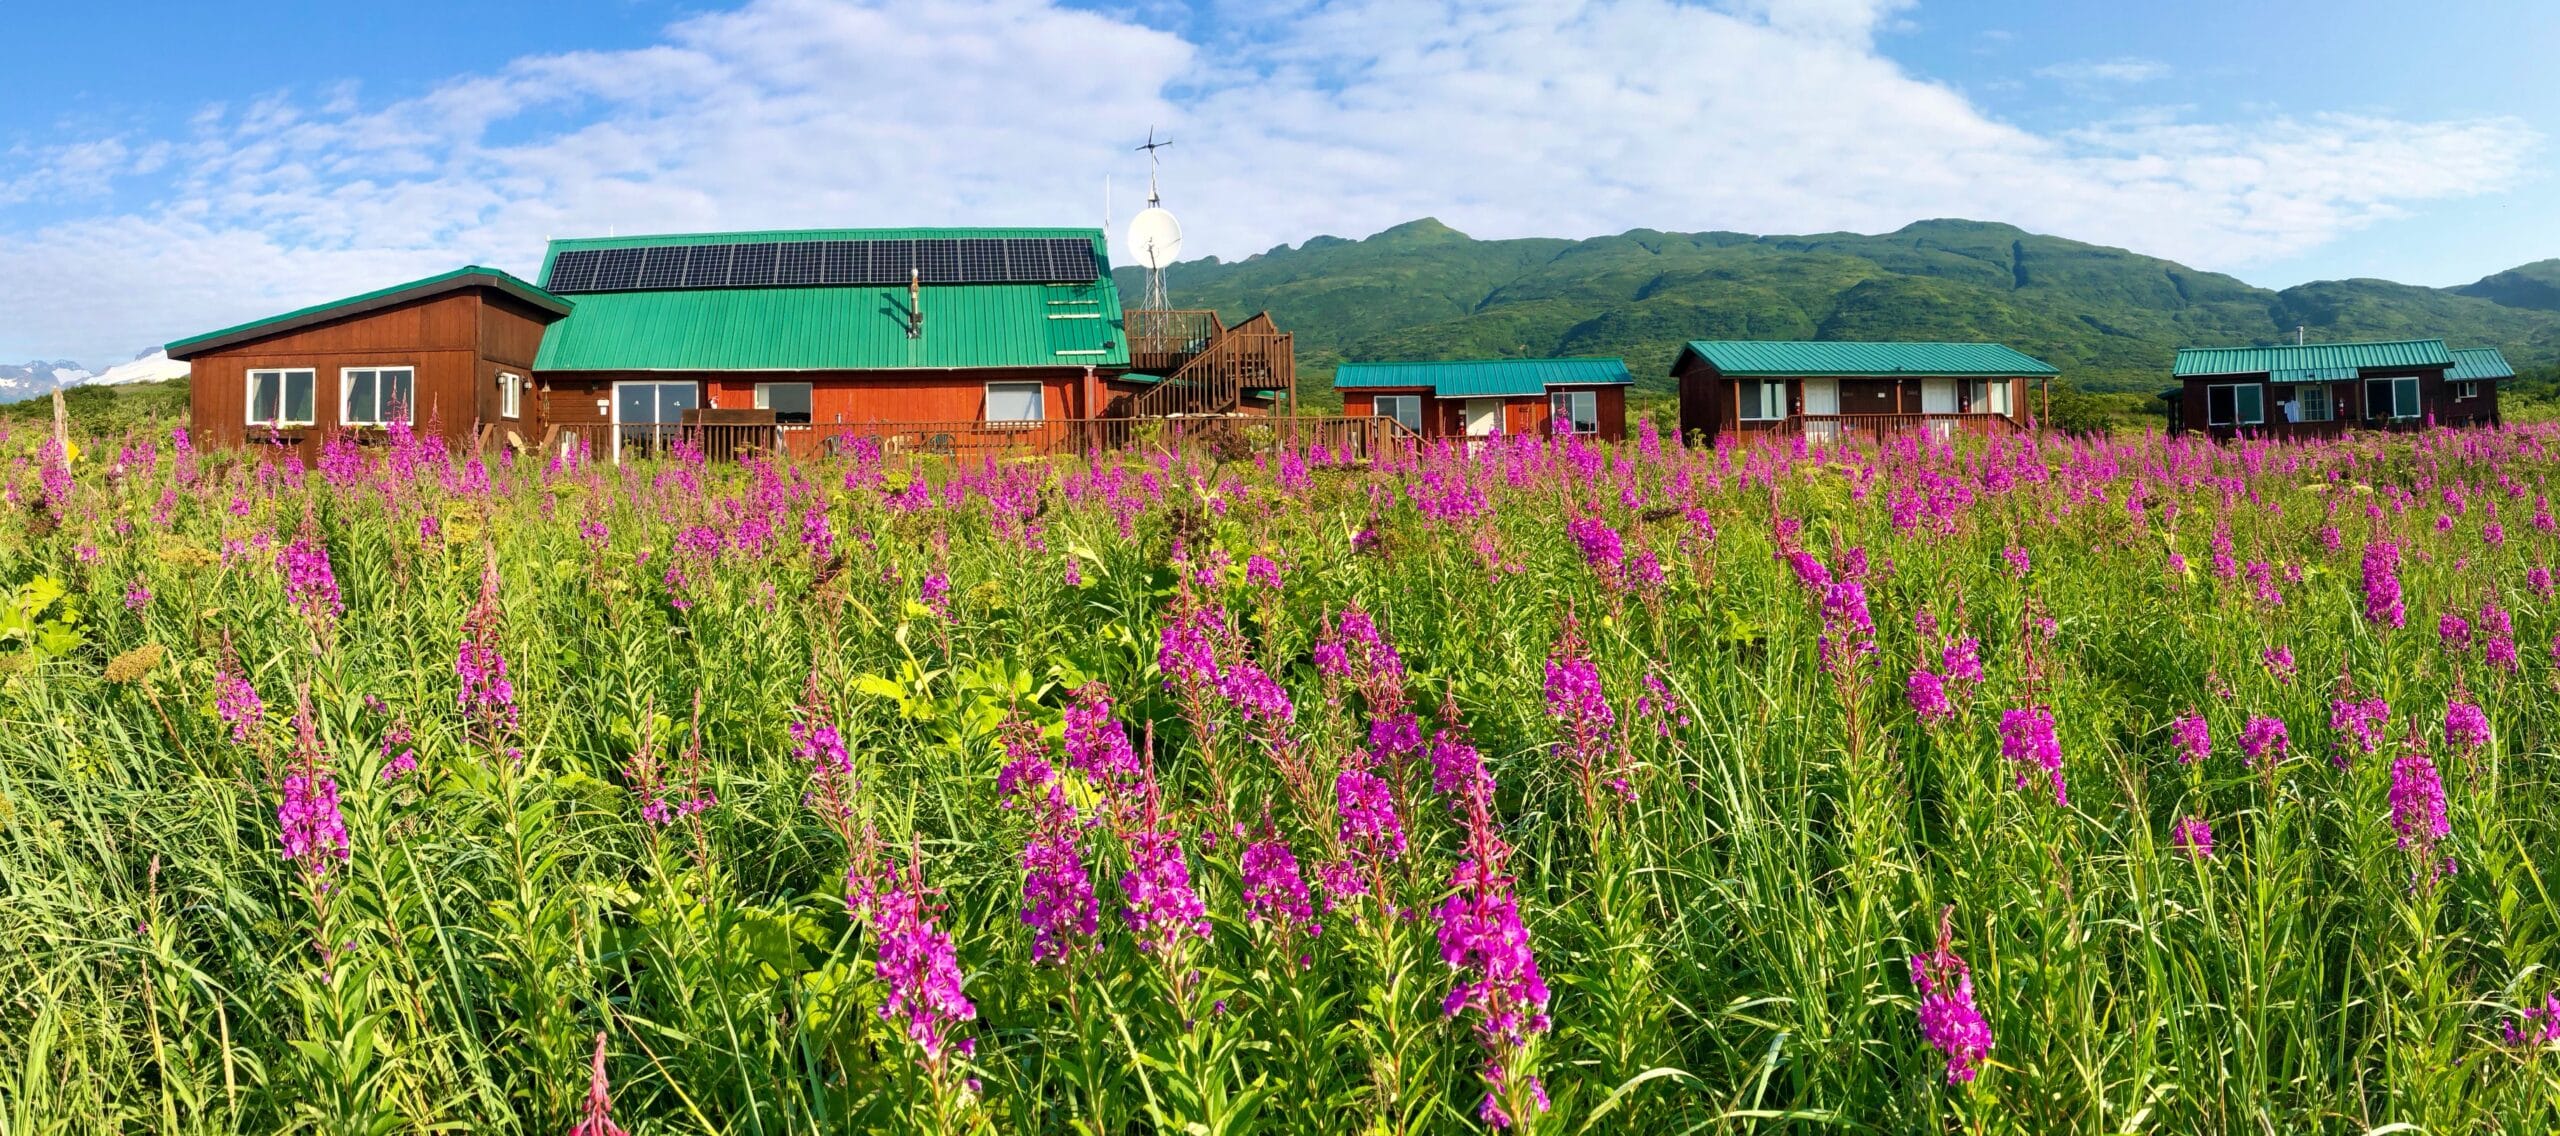 fireweed in the front lodge in the back and blue skies